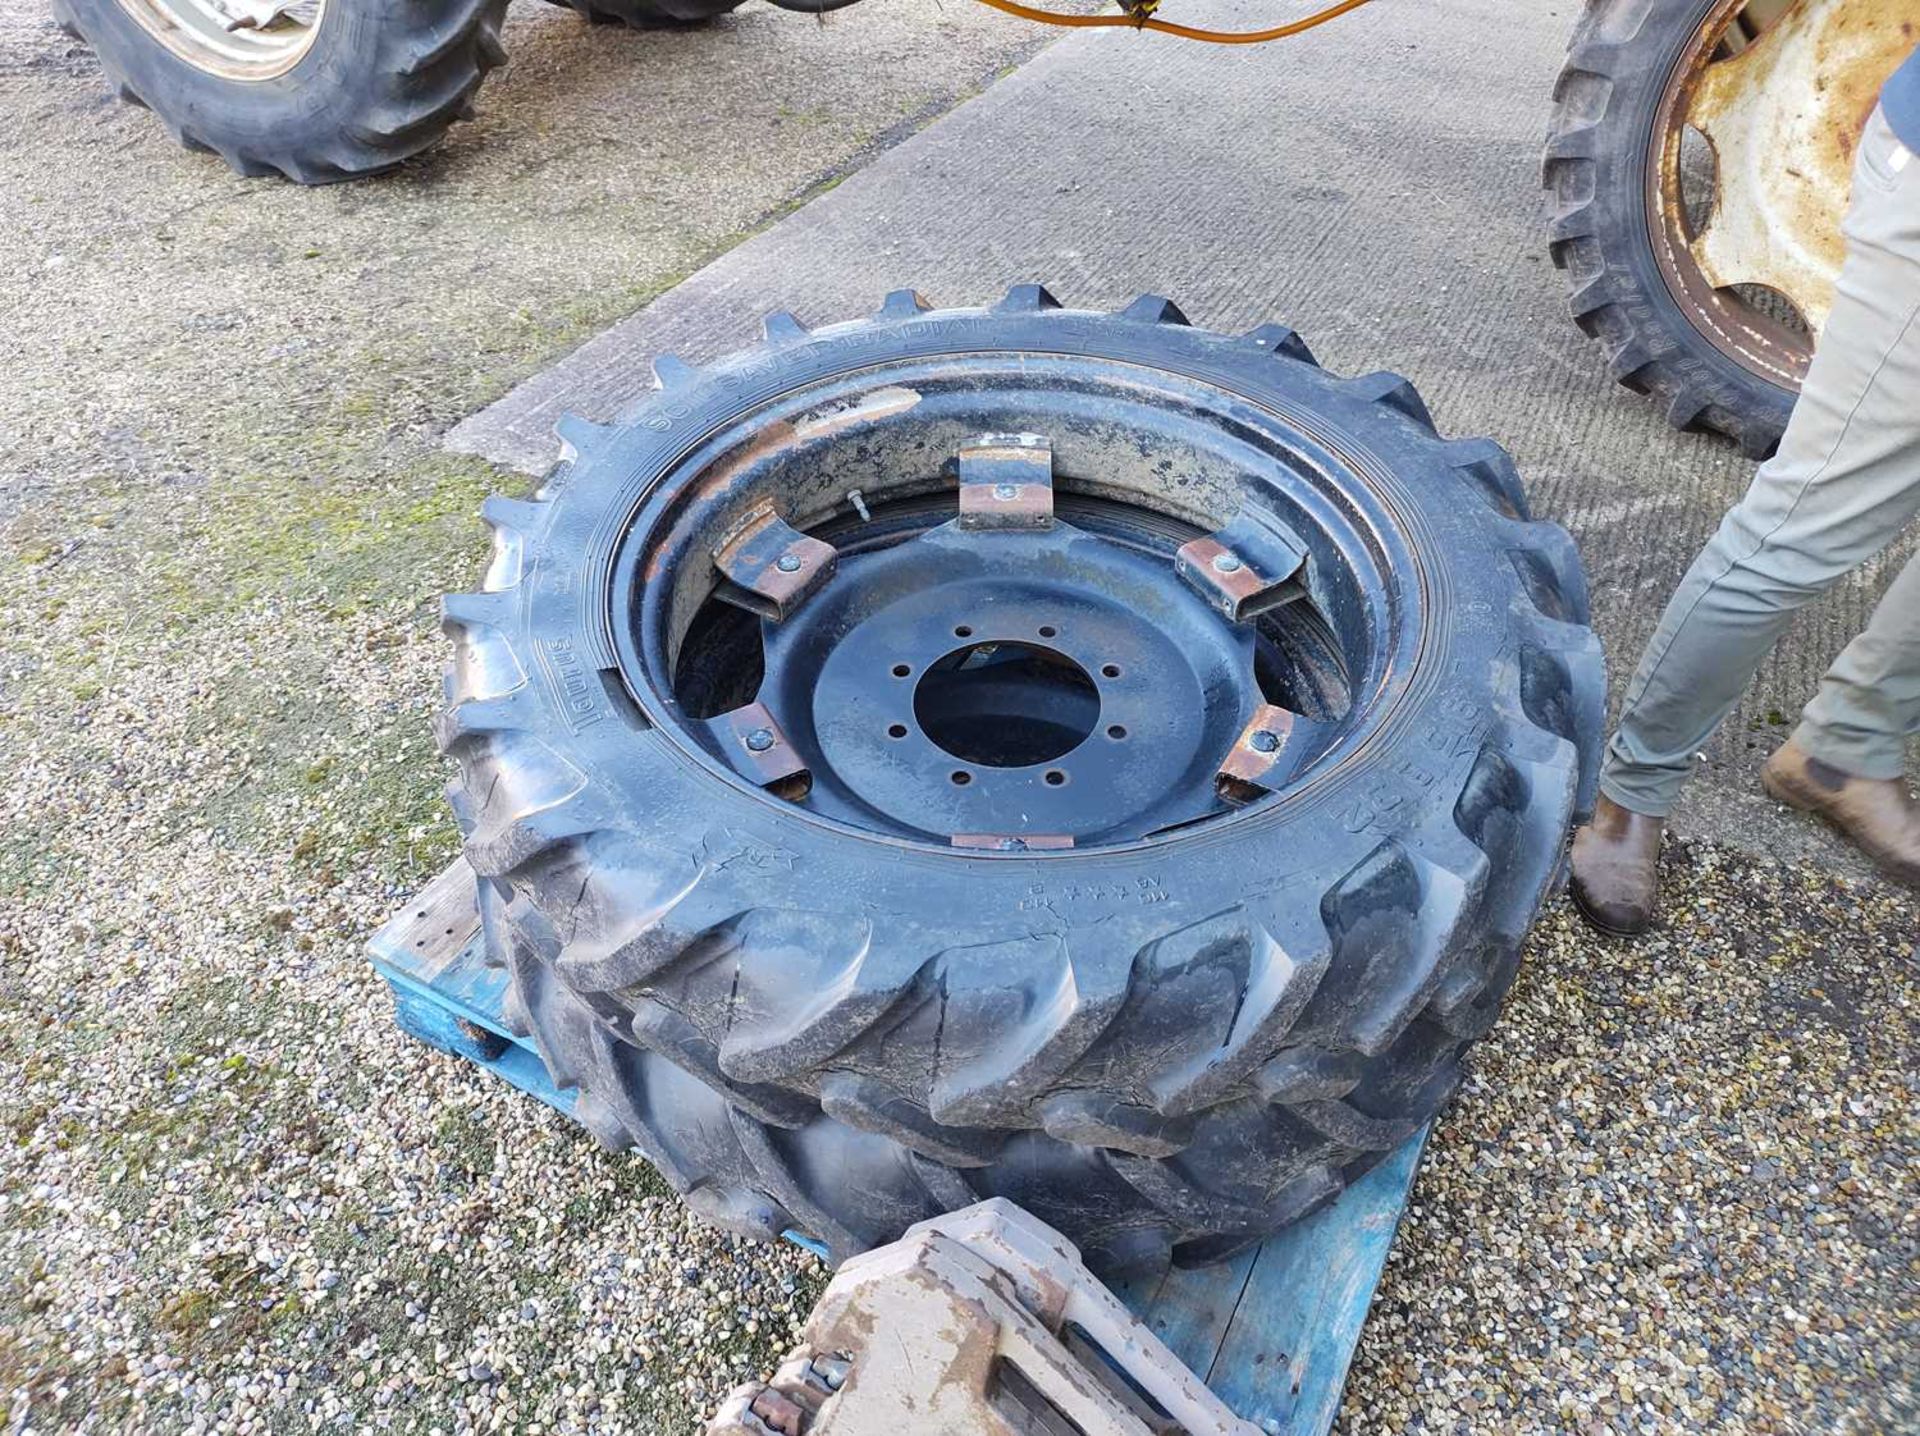 Set of Front and Rear Rowcrop Wheels (Rear 230/95R48 - Front 9.5R32) - Image 4 of 4